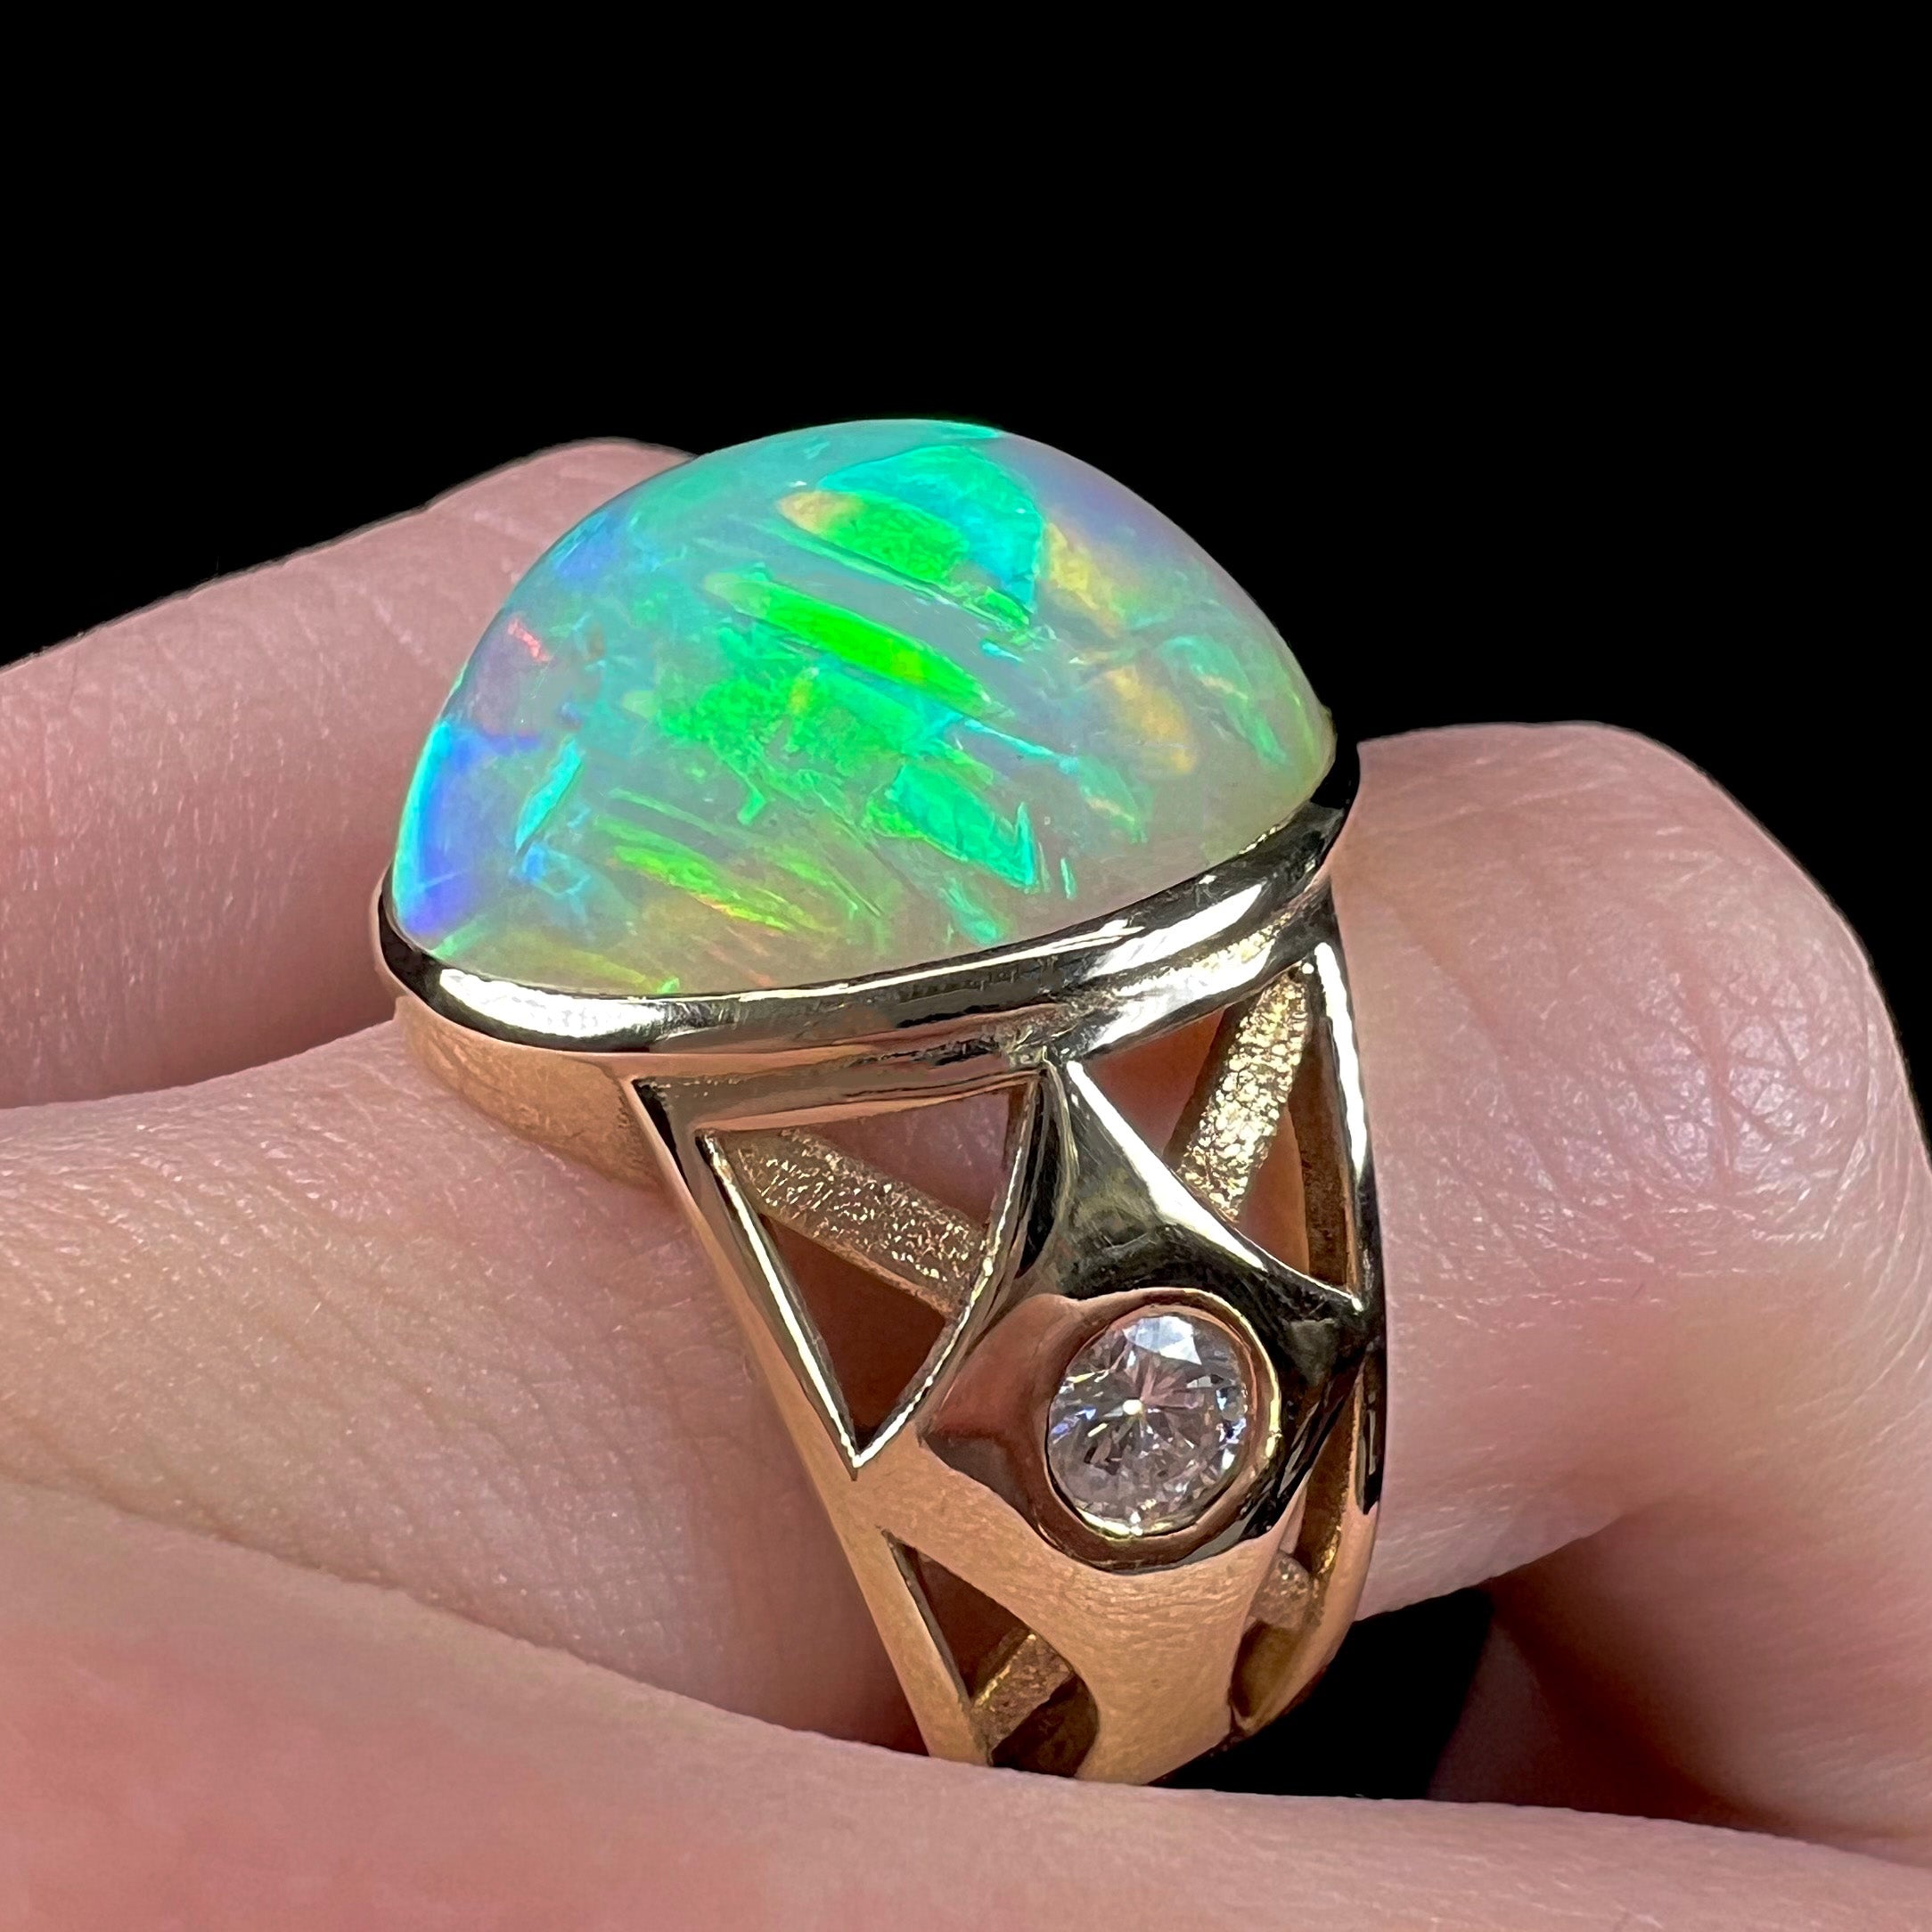 Buy Fire Opal Silver Men Ring/ 925 Sterling Silver Ring/ Wedding Ring/  Engagement Ring/ Opal Gemstone Ring for Him/ Best Gift for Him. Online in  India - Etsy